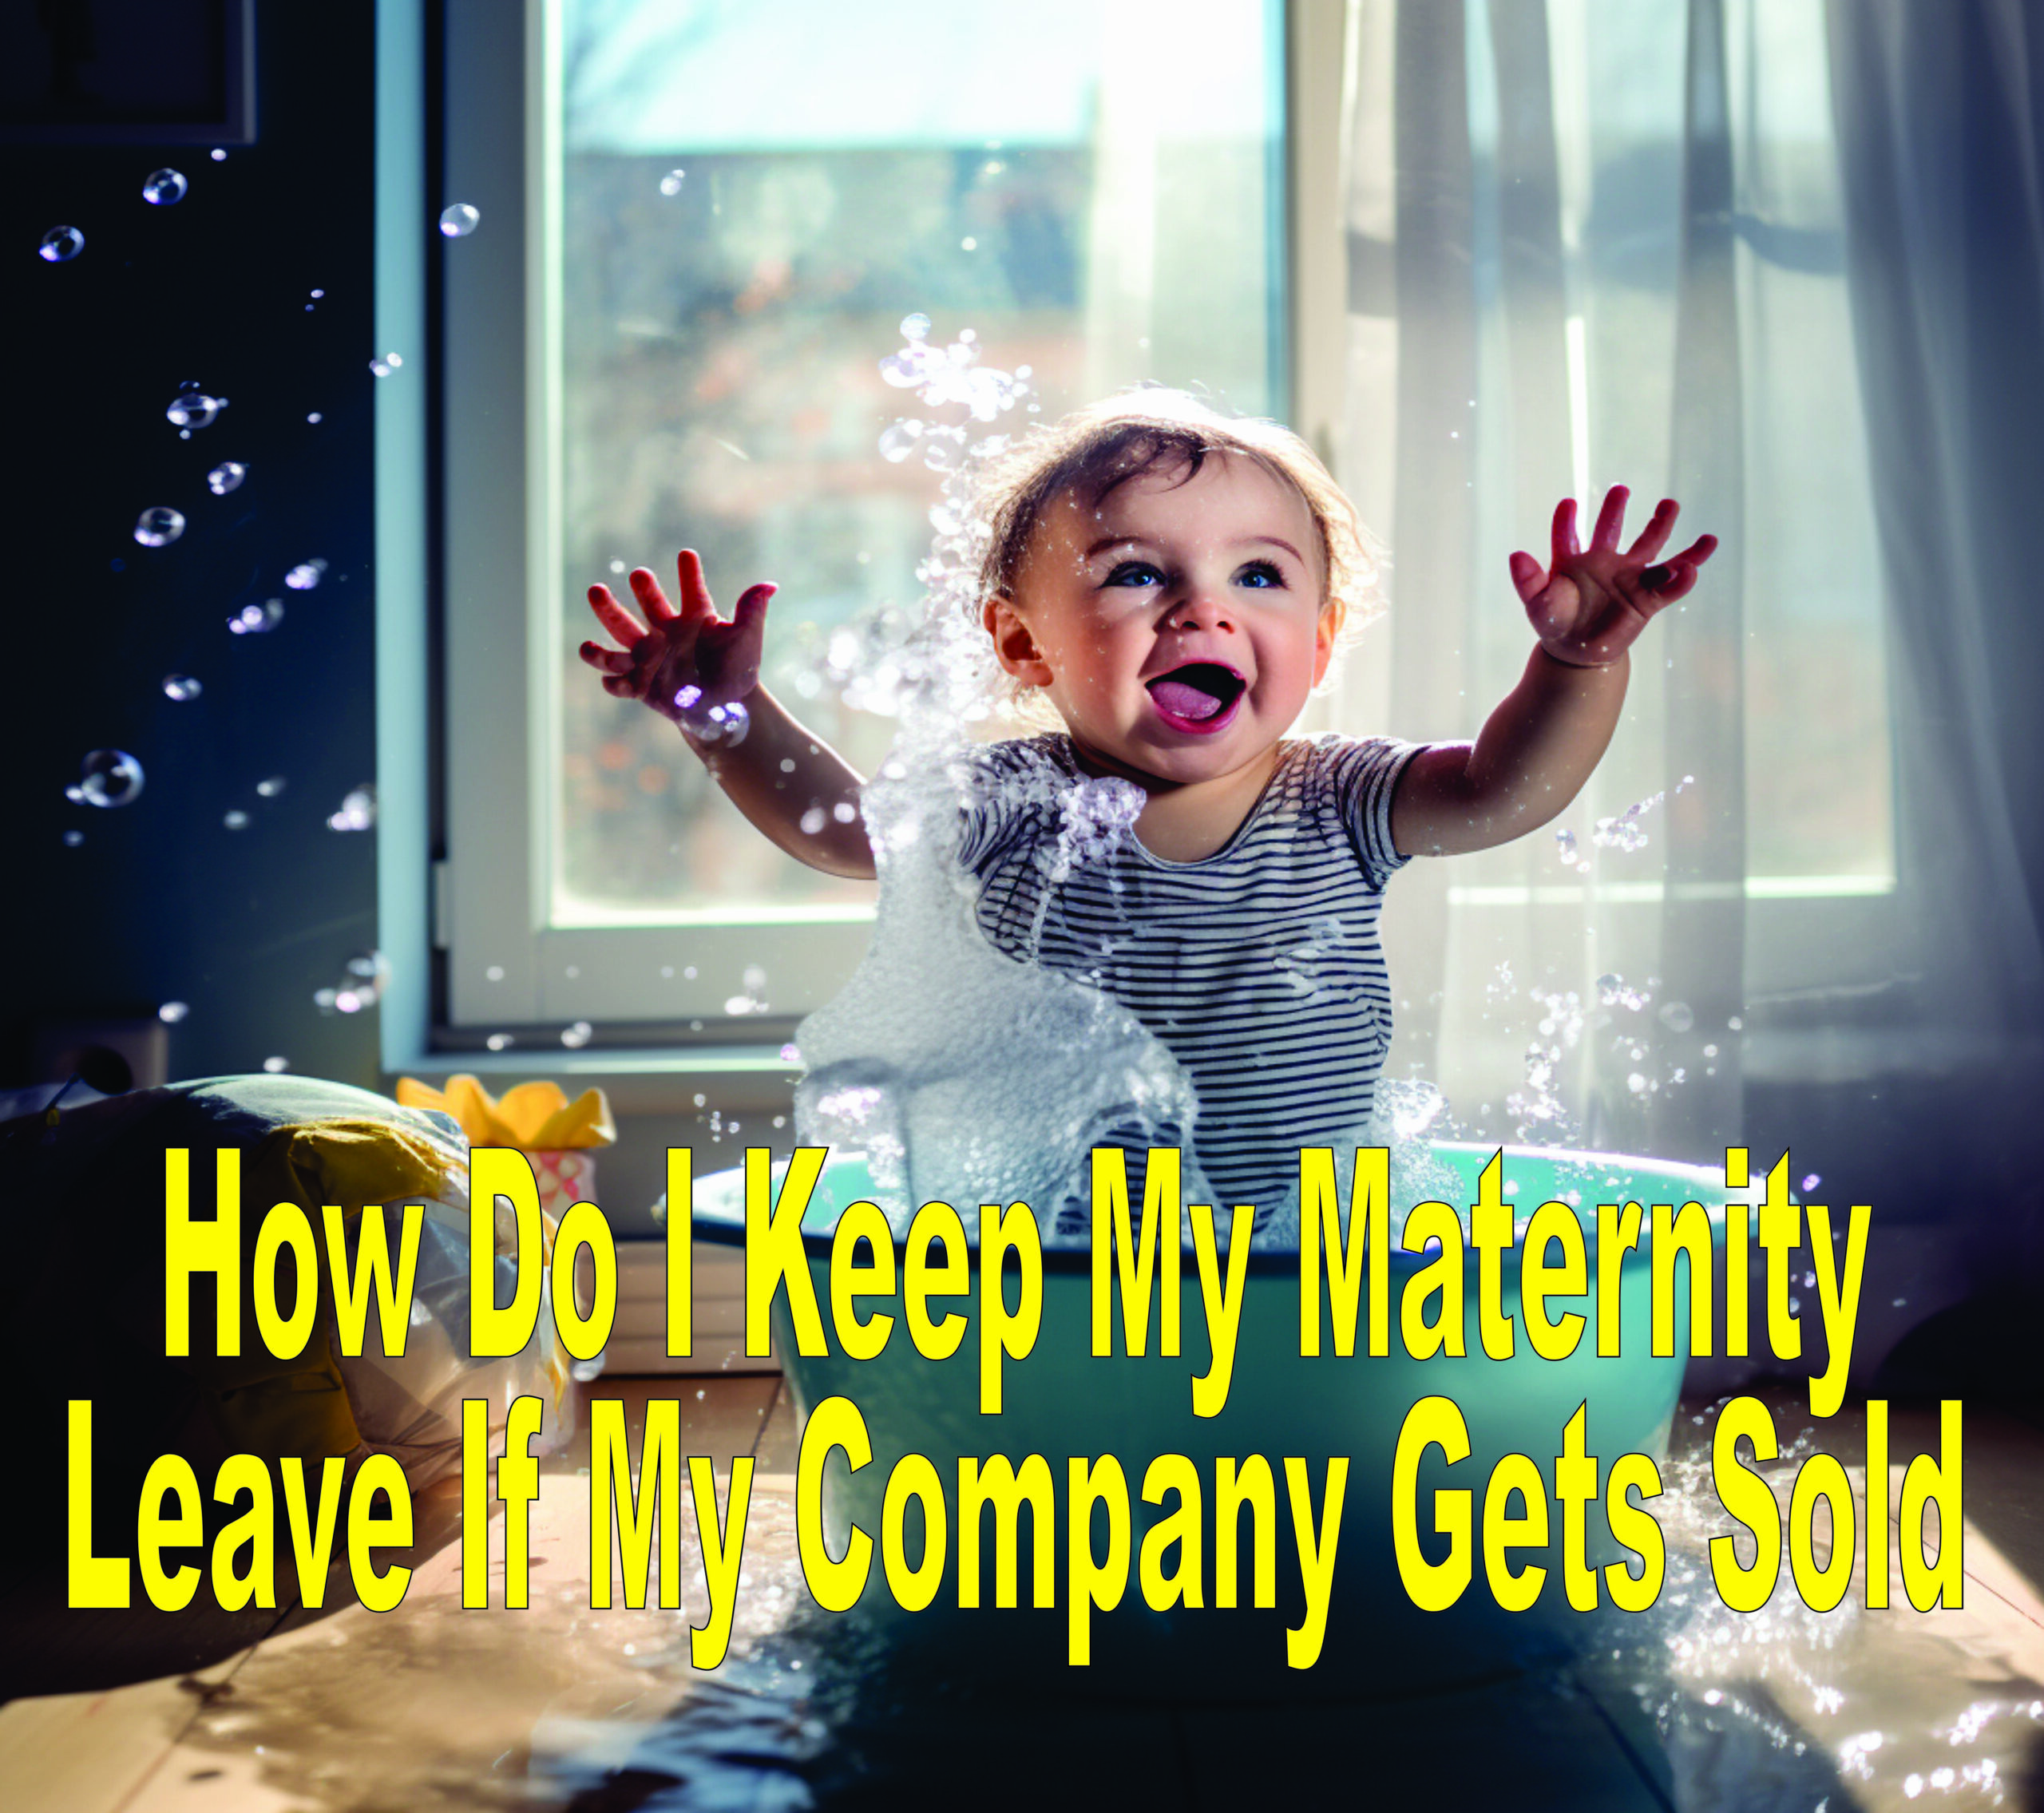 How Do I Keep My Maternity Leave If My Company Gets Sold